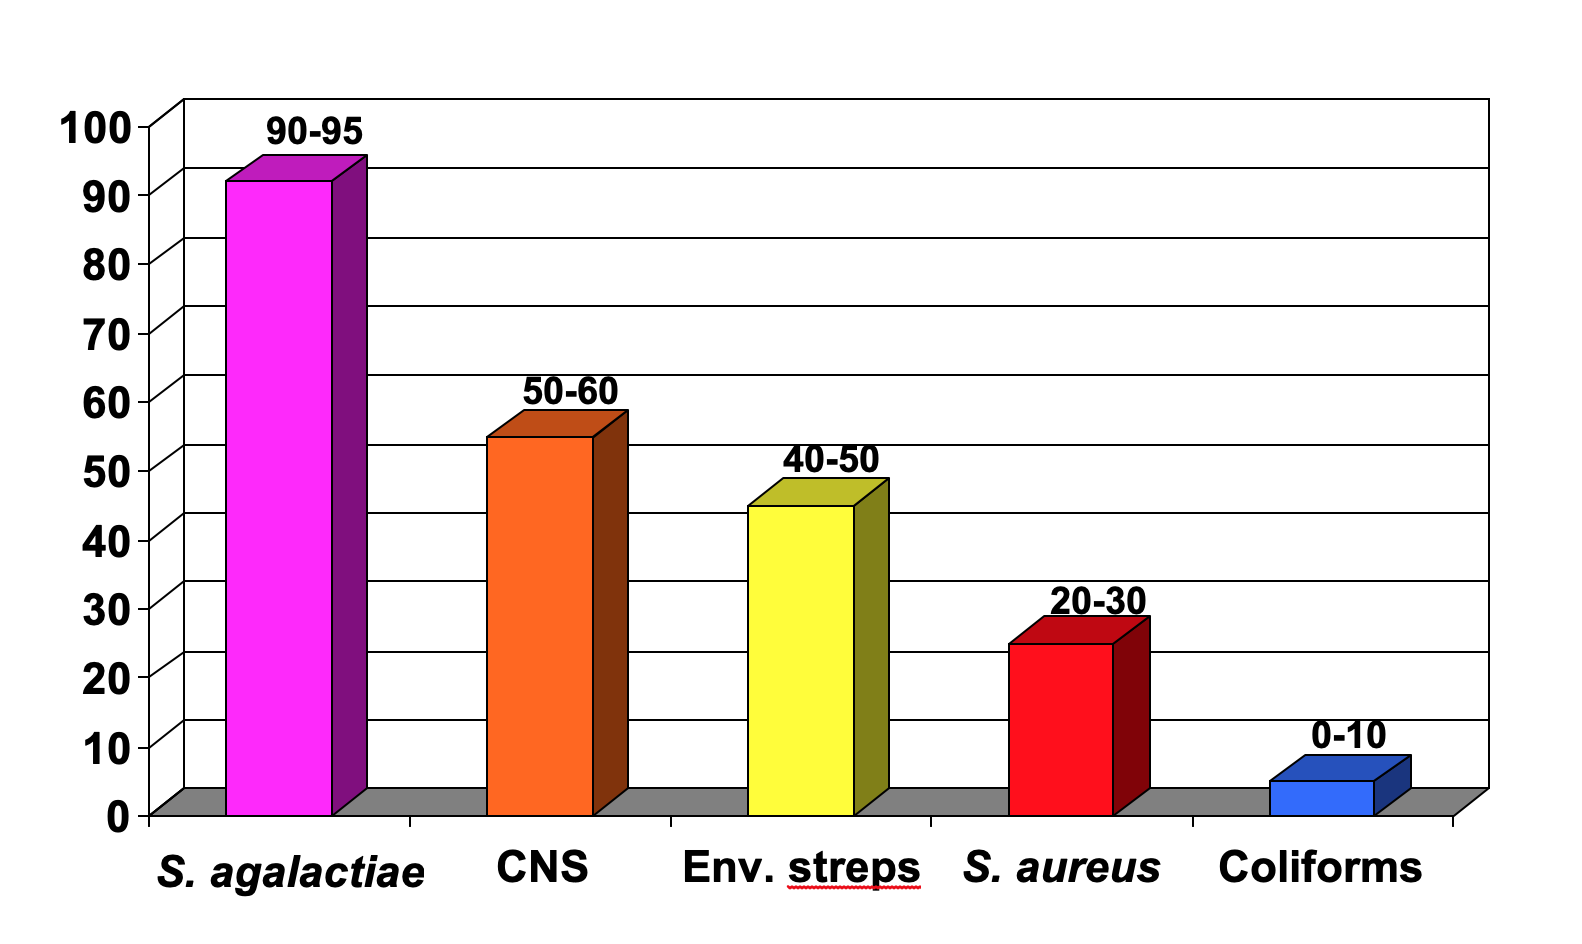 Bar chart shows cure rates for mastitis based on various causes; 90-95 percent cured for S. agalactiae, down to 0-10 percent cured from coliforms.